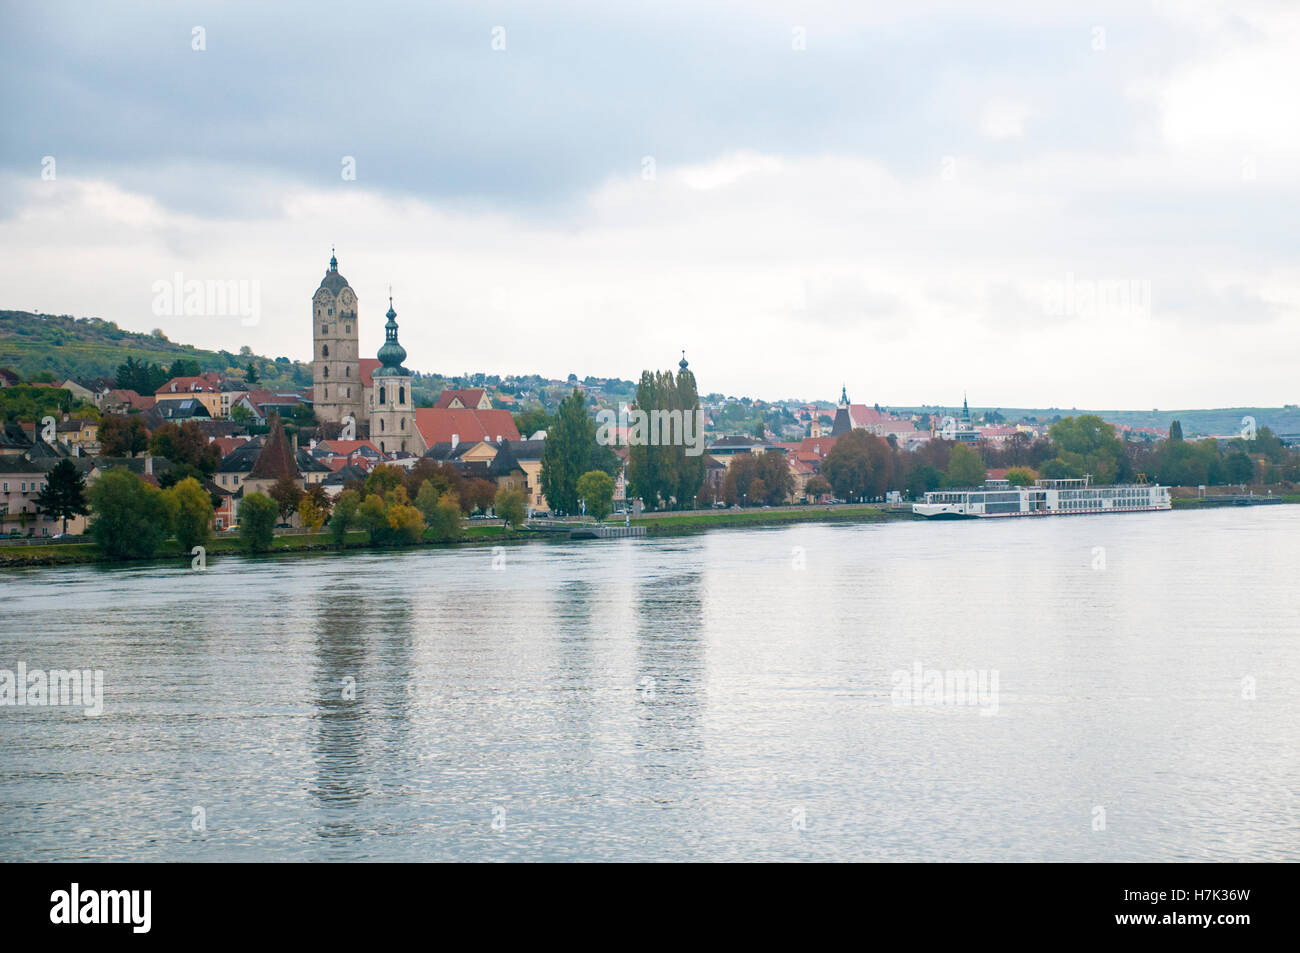 Mautern An Der Donau High Resolution Stock Photography and Images - Alamy